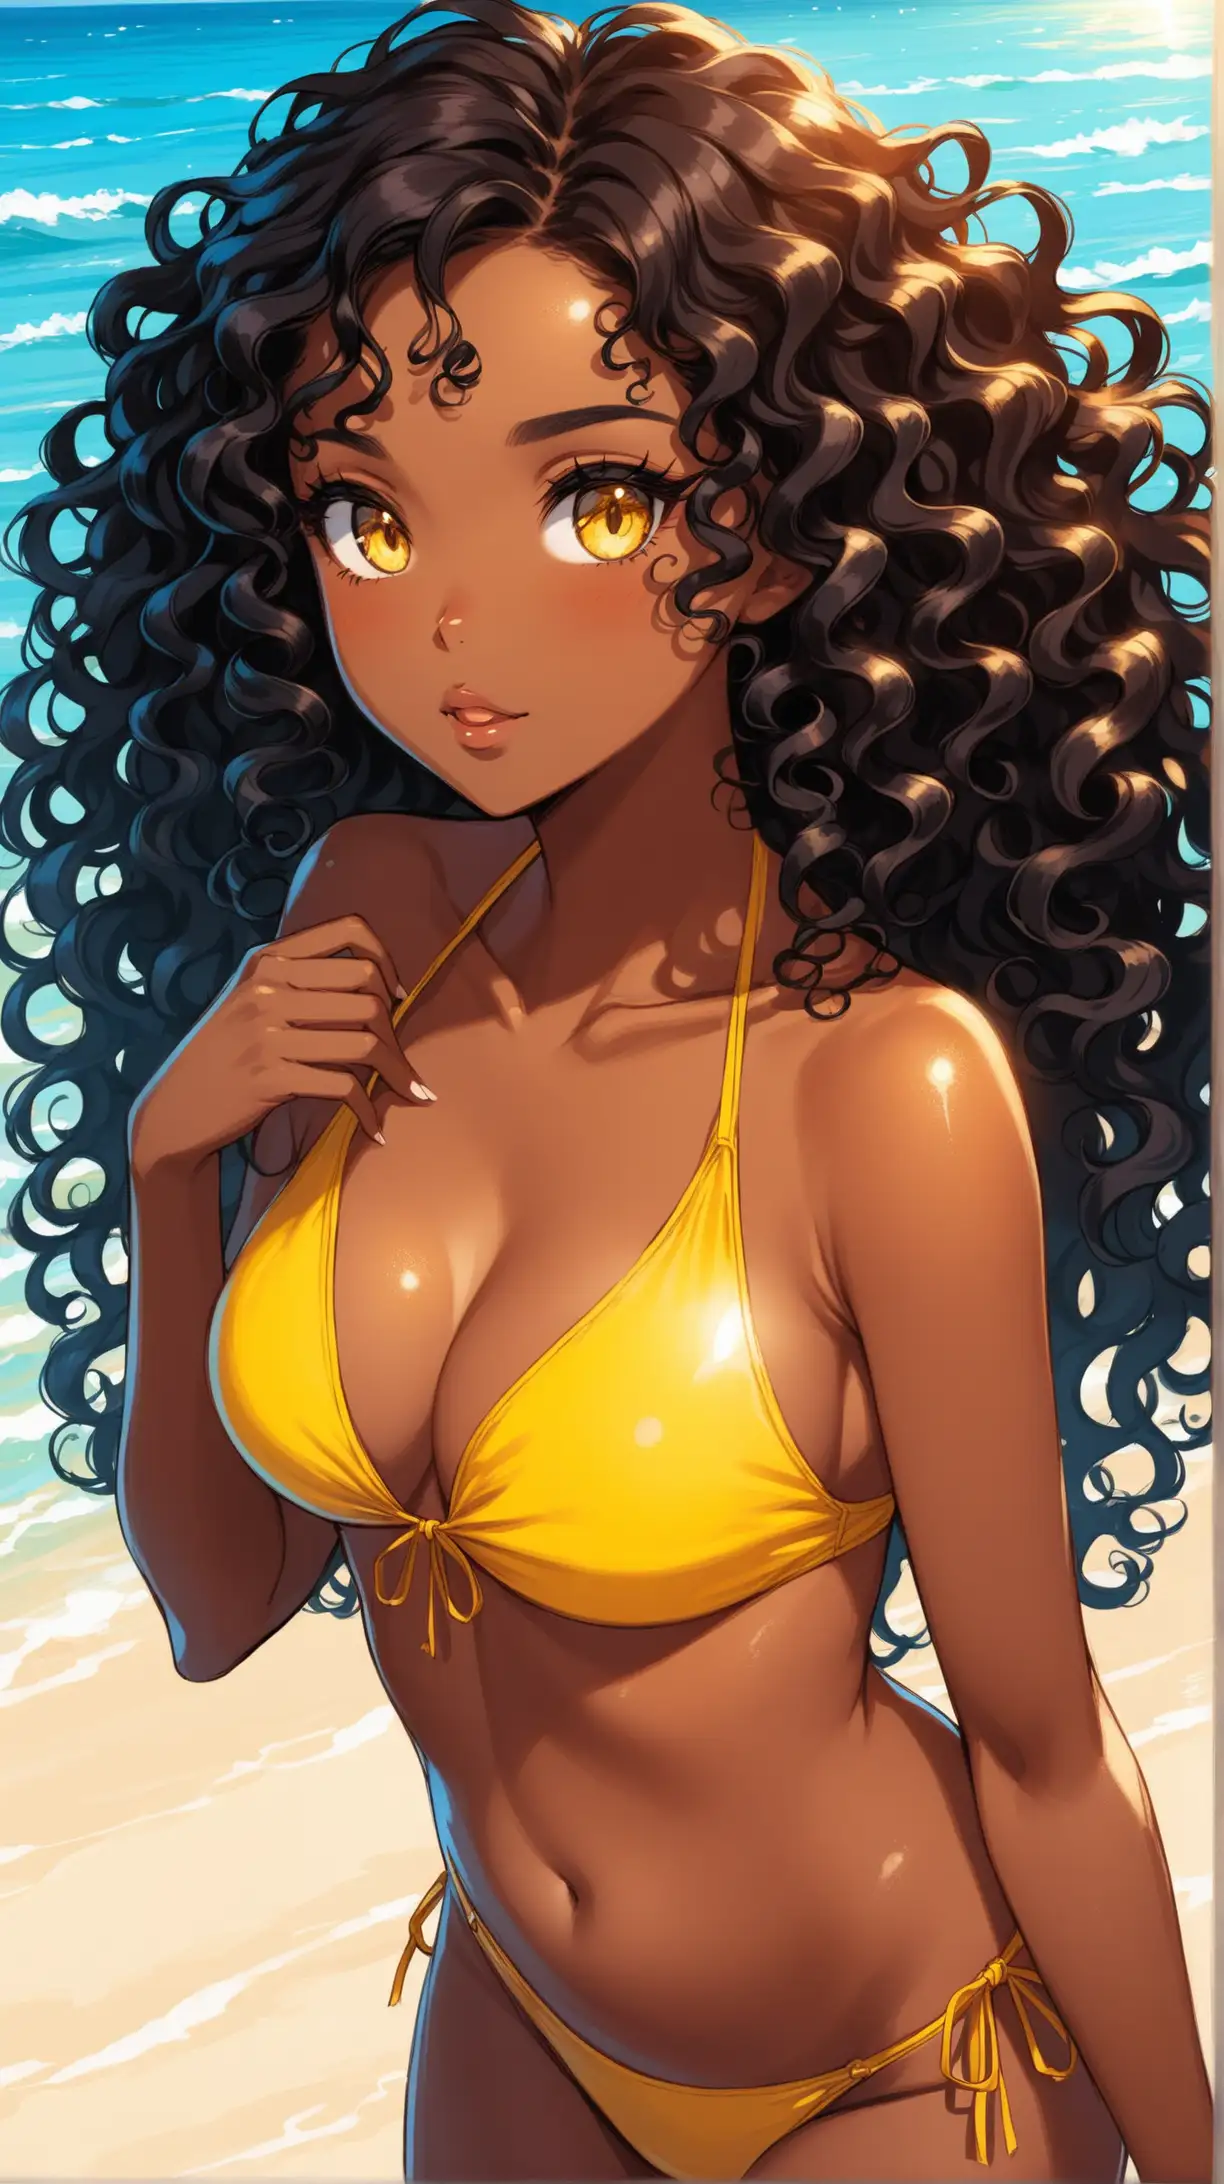 Curly Haired Ebony Girl in Yellow Swimsuit